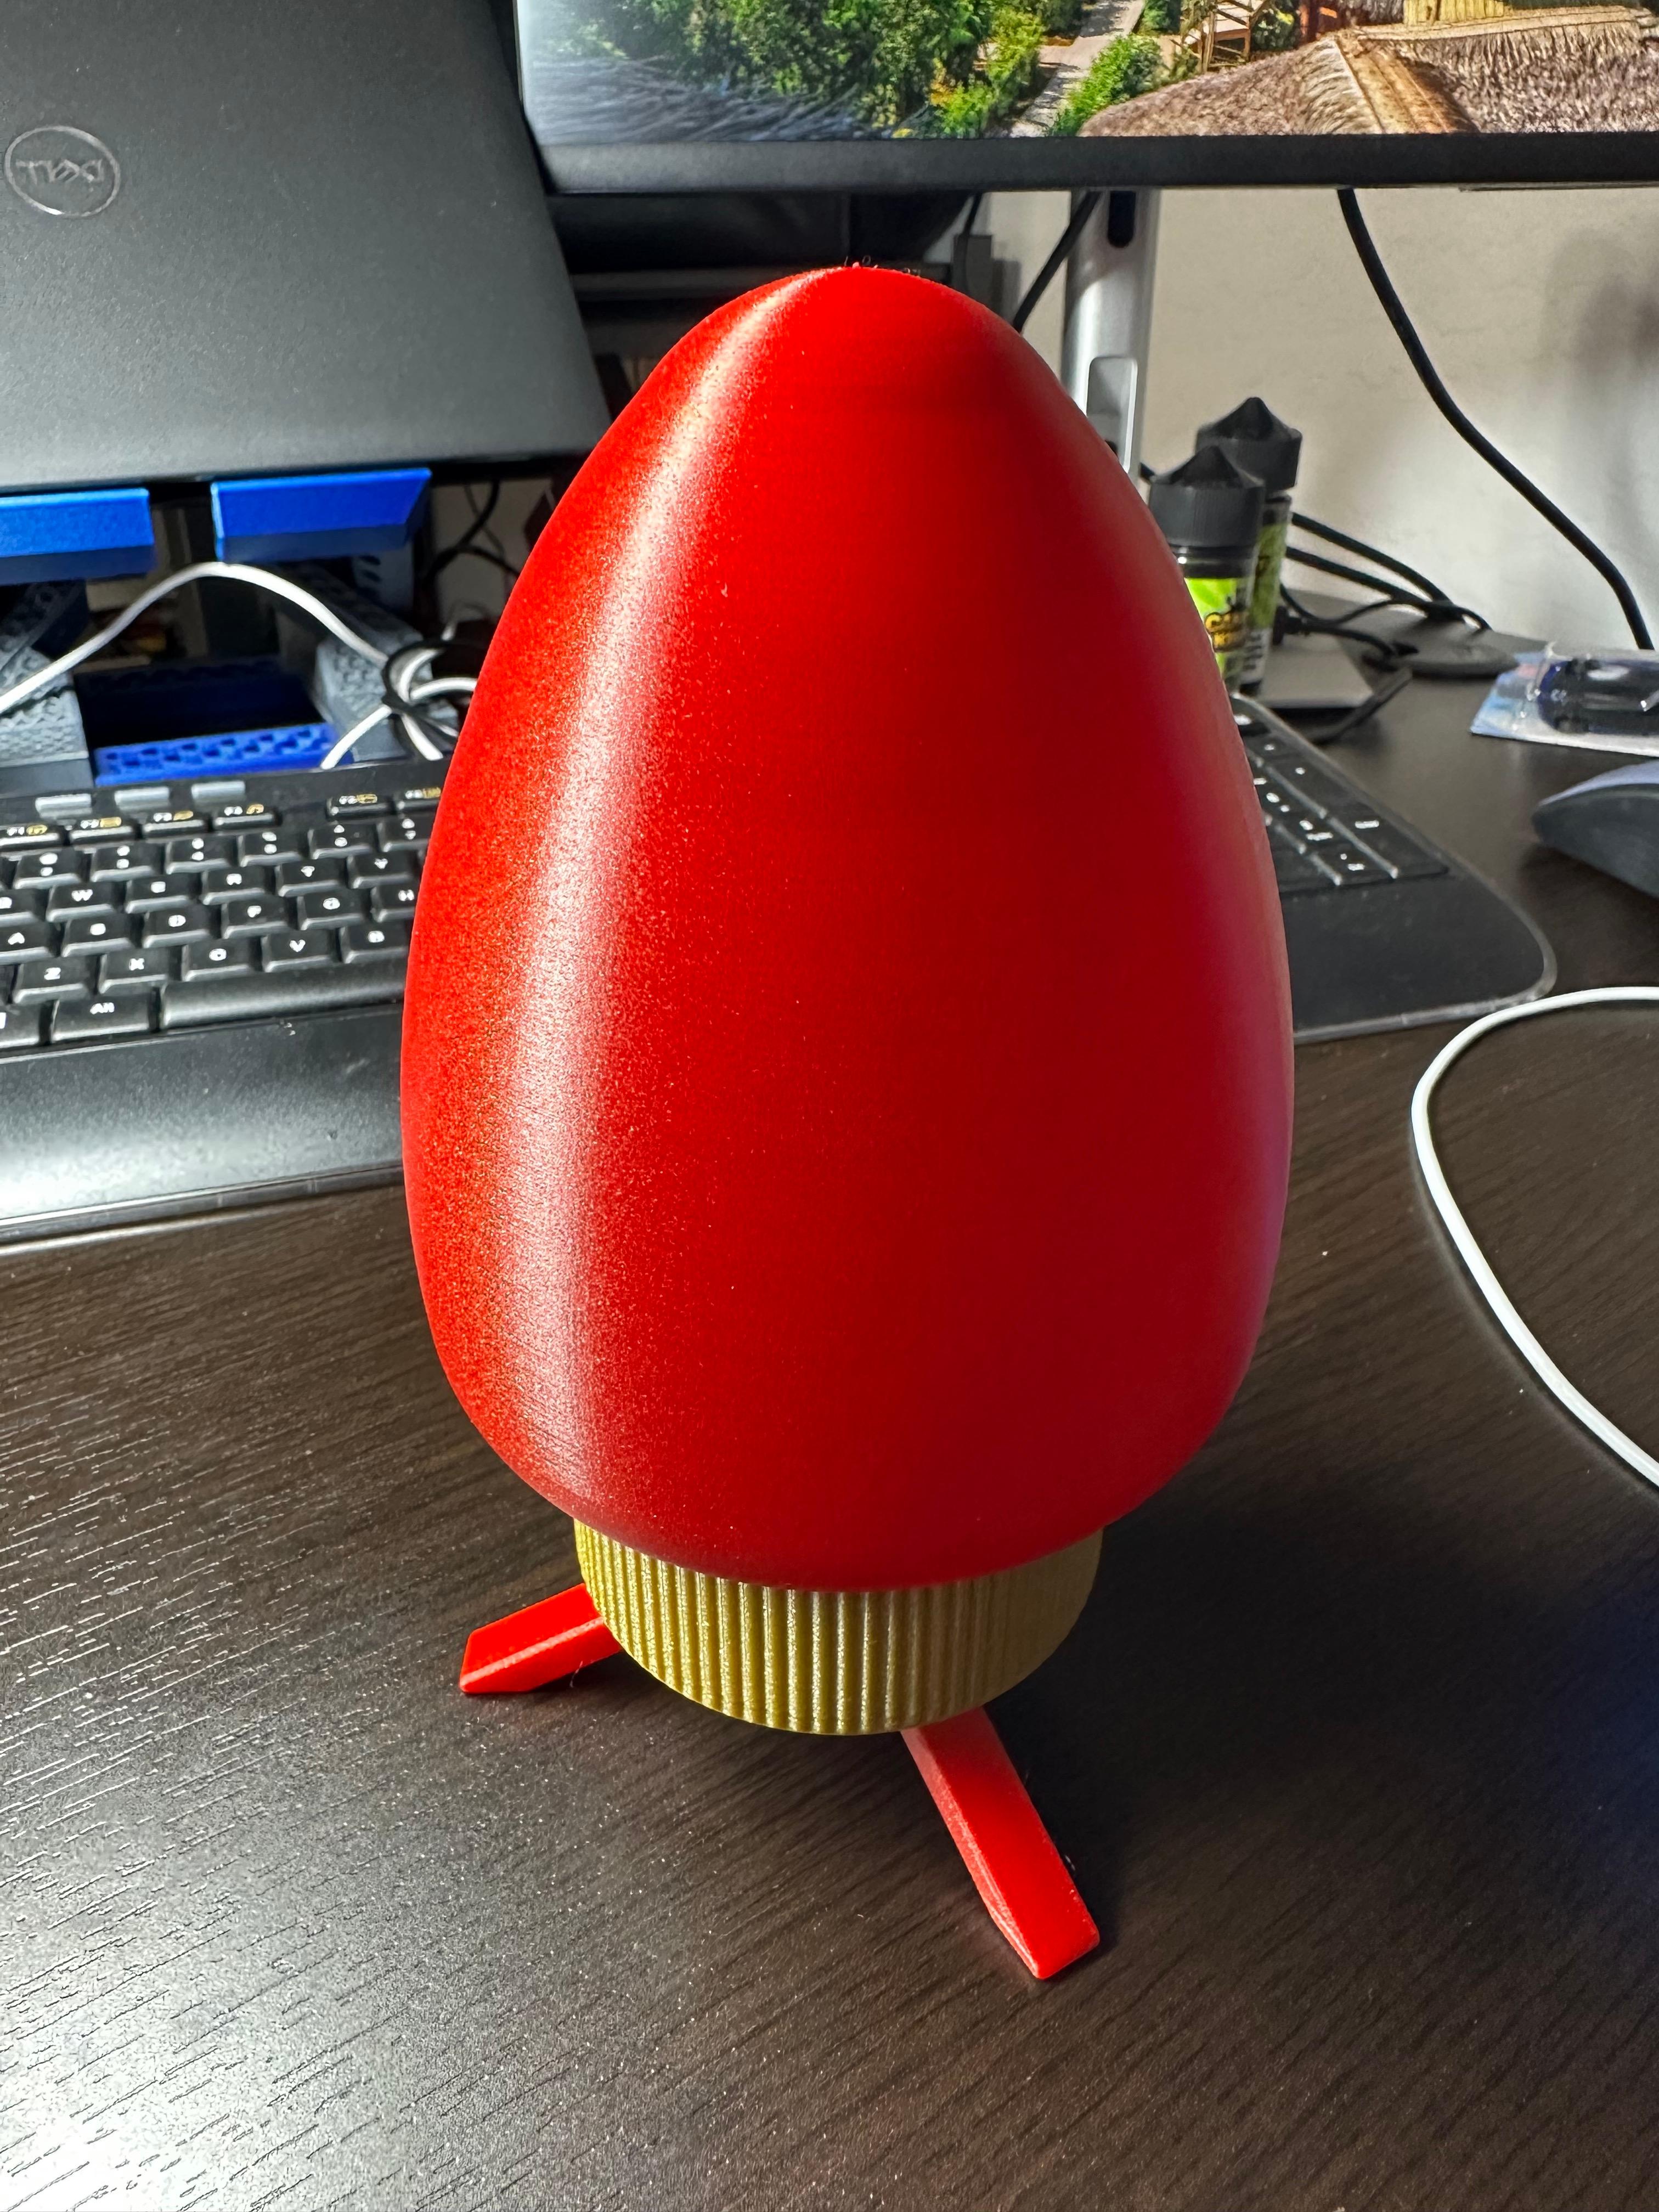 CHRISTMAS BULB WITH STAND OR HOOK  3d model